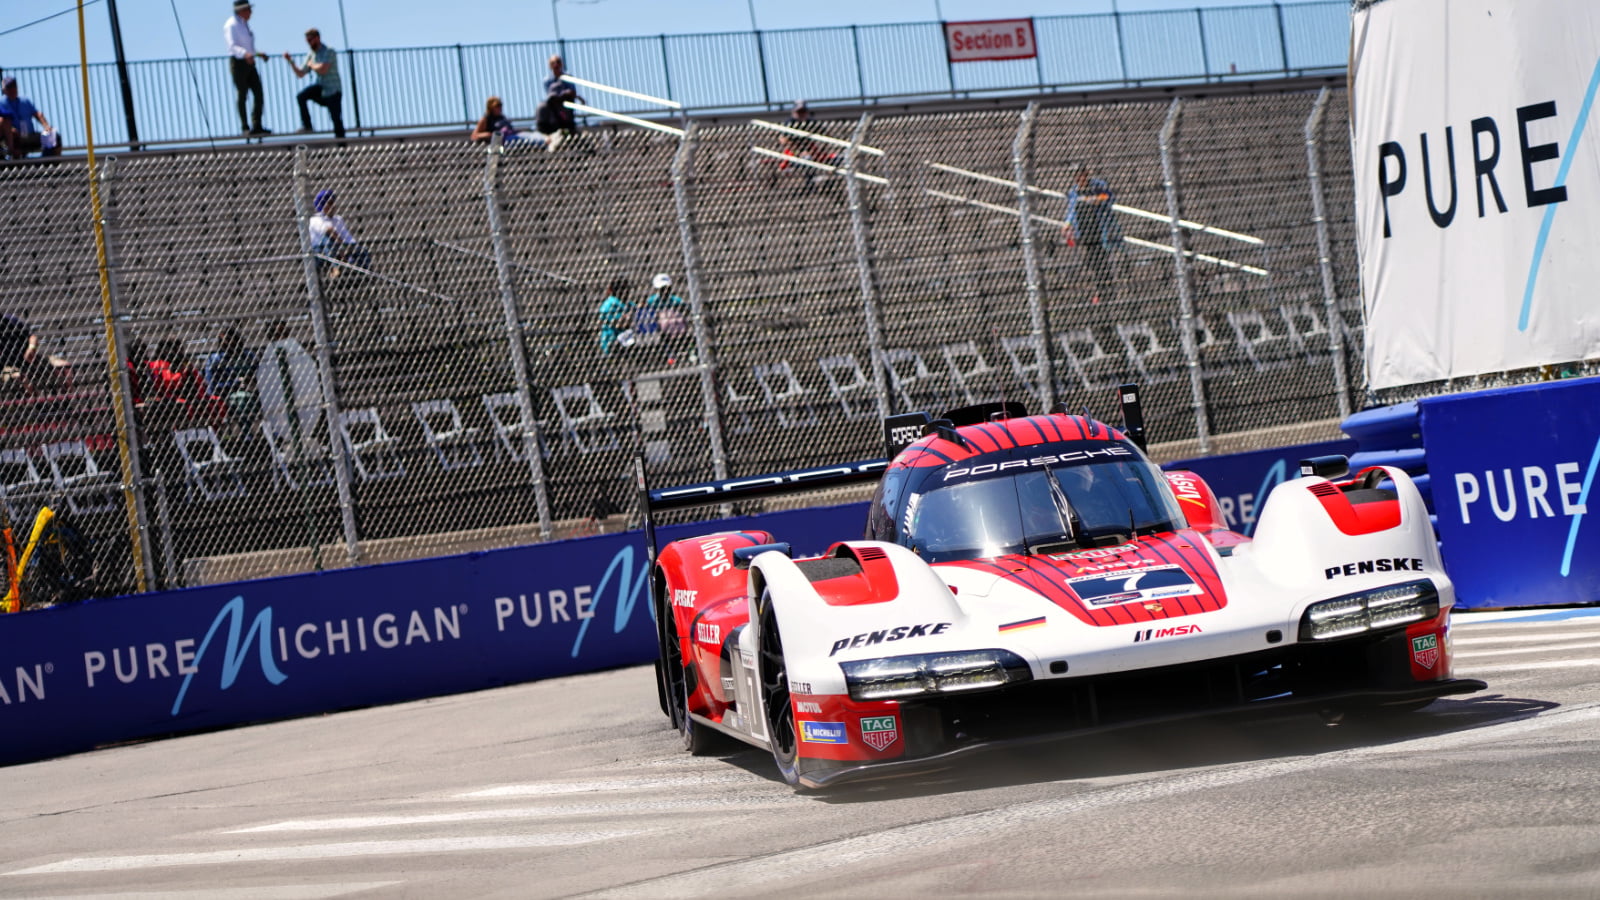 Tandy Dominates Detroit Qualifying to Secure Pole Position Amidst Chaos